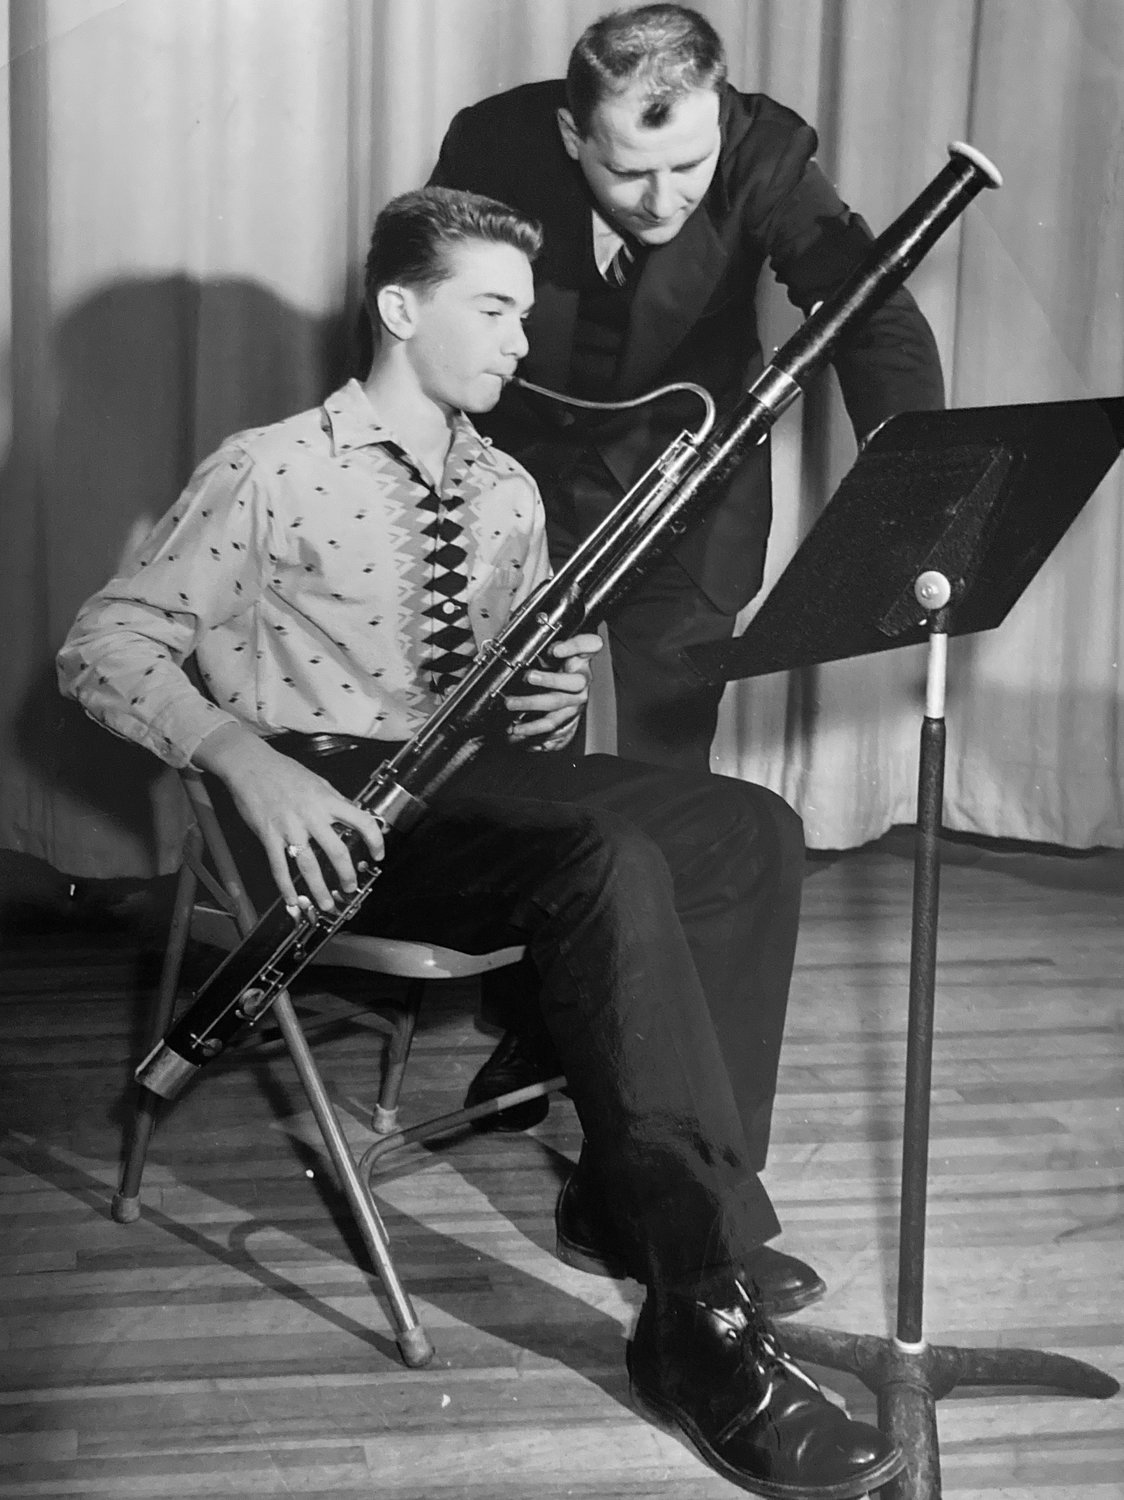 Katz taught several students who went on to become professional musicians. Above, he worked with Alan Goodman, who was the principal bassoonist for the Los Angeles Philharmonic from 1970 until he retired in 2001.